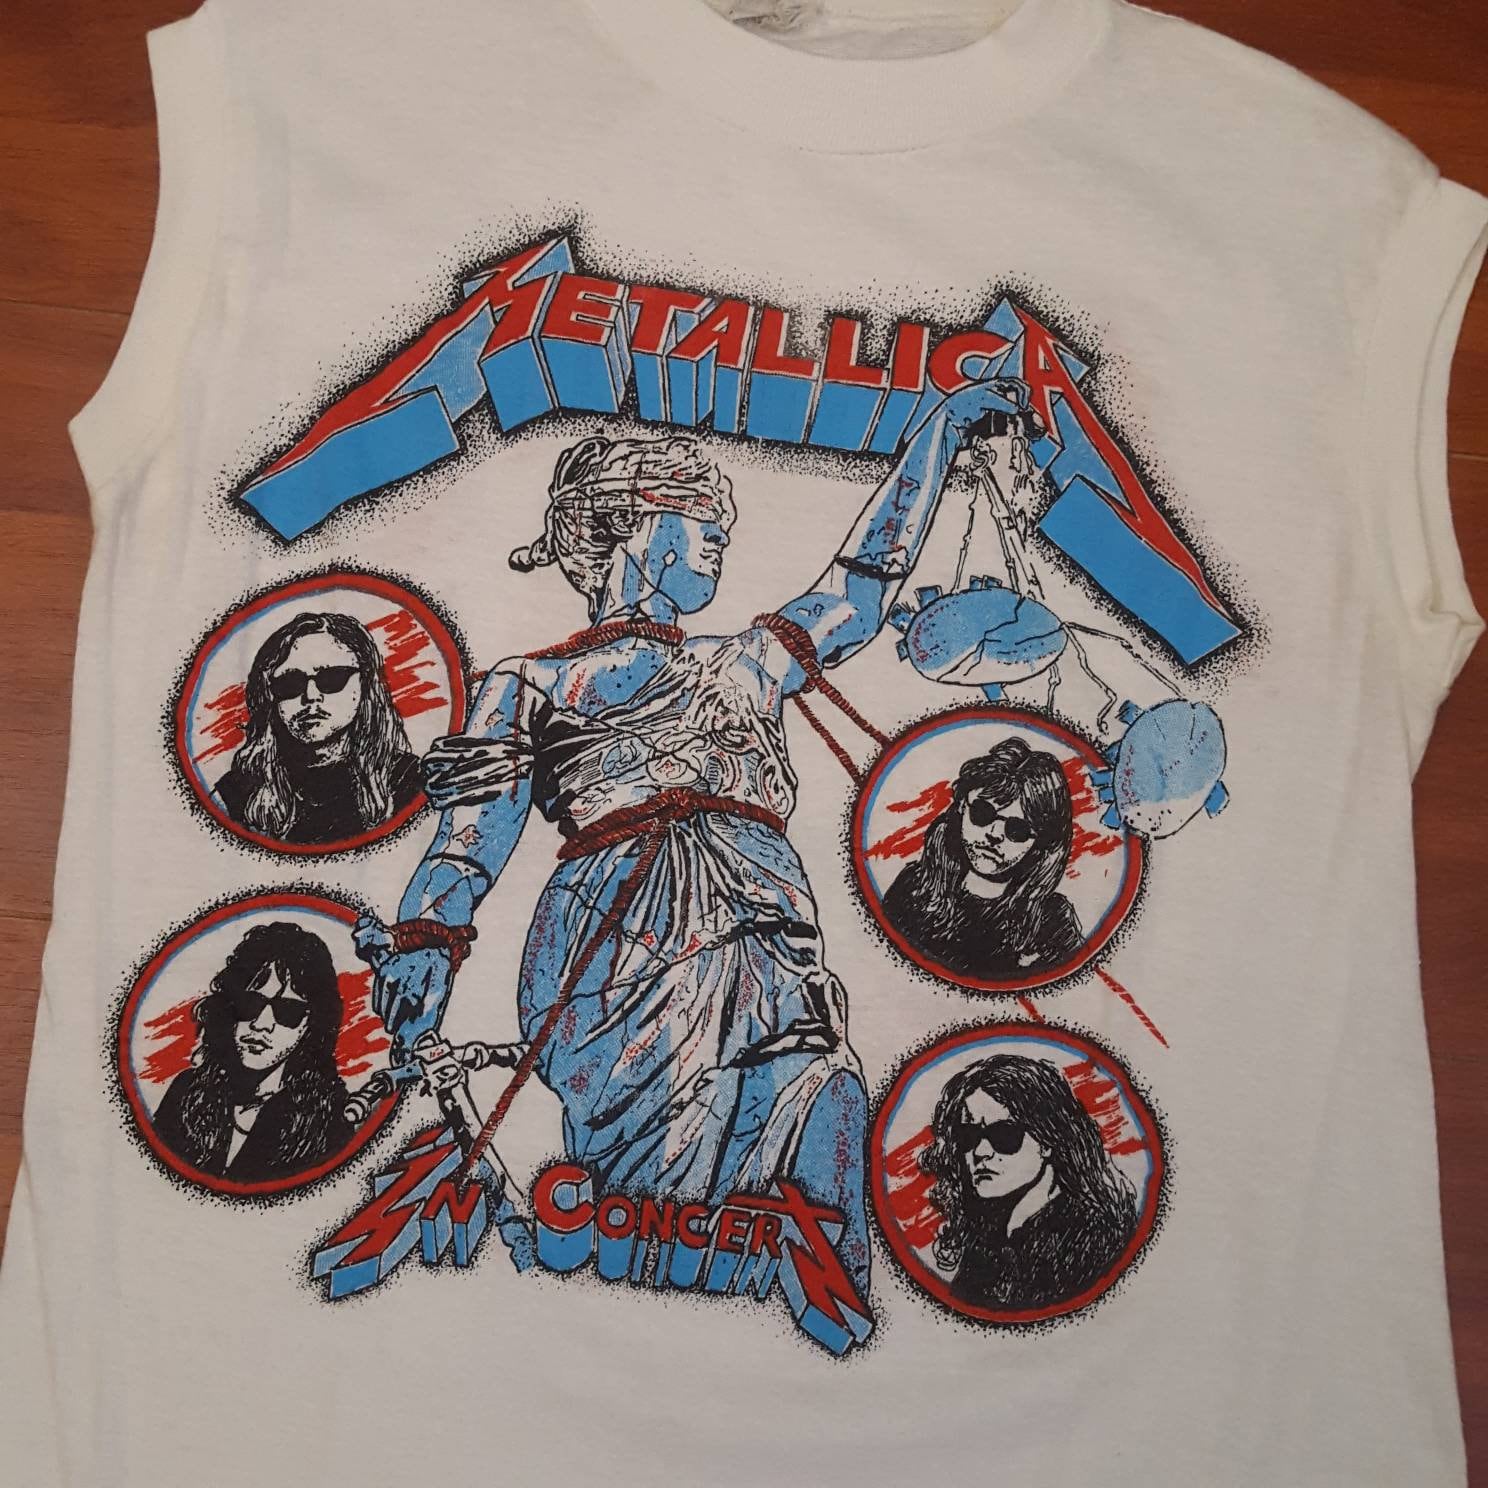 1988 Metallica Live on Tour and Justice for All Women's -  Denmark